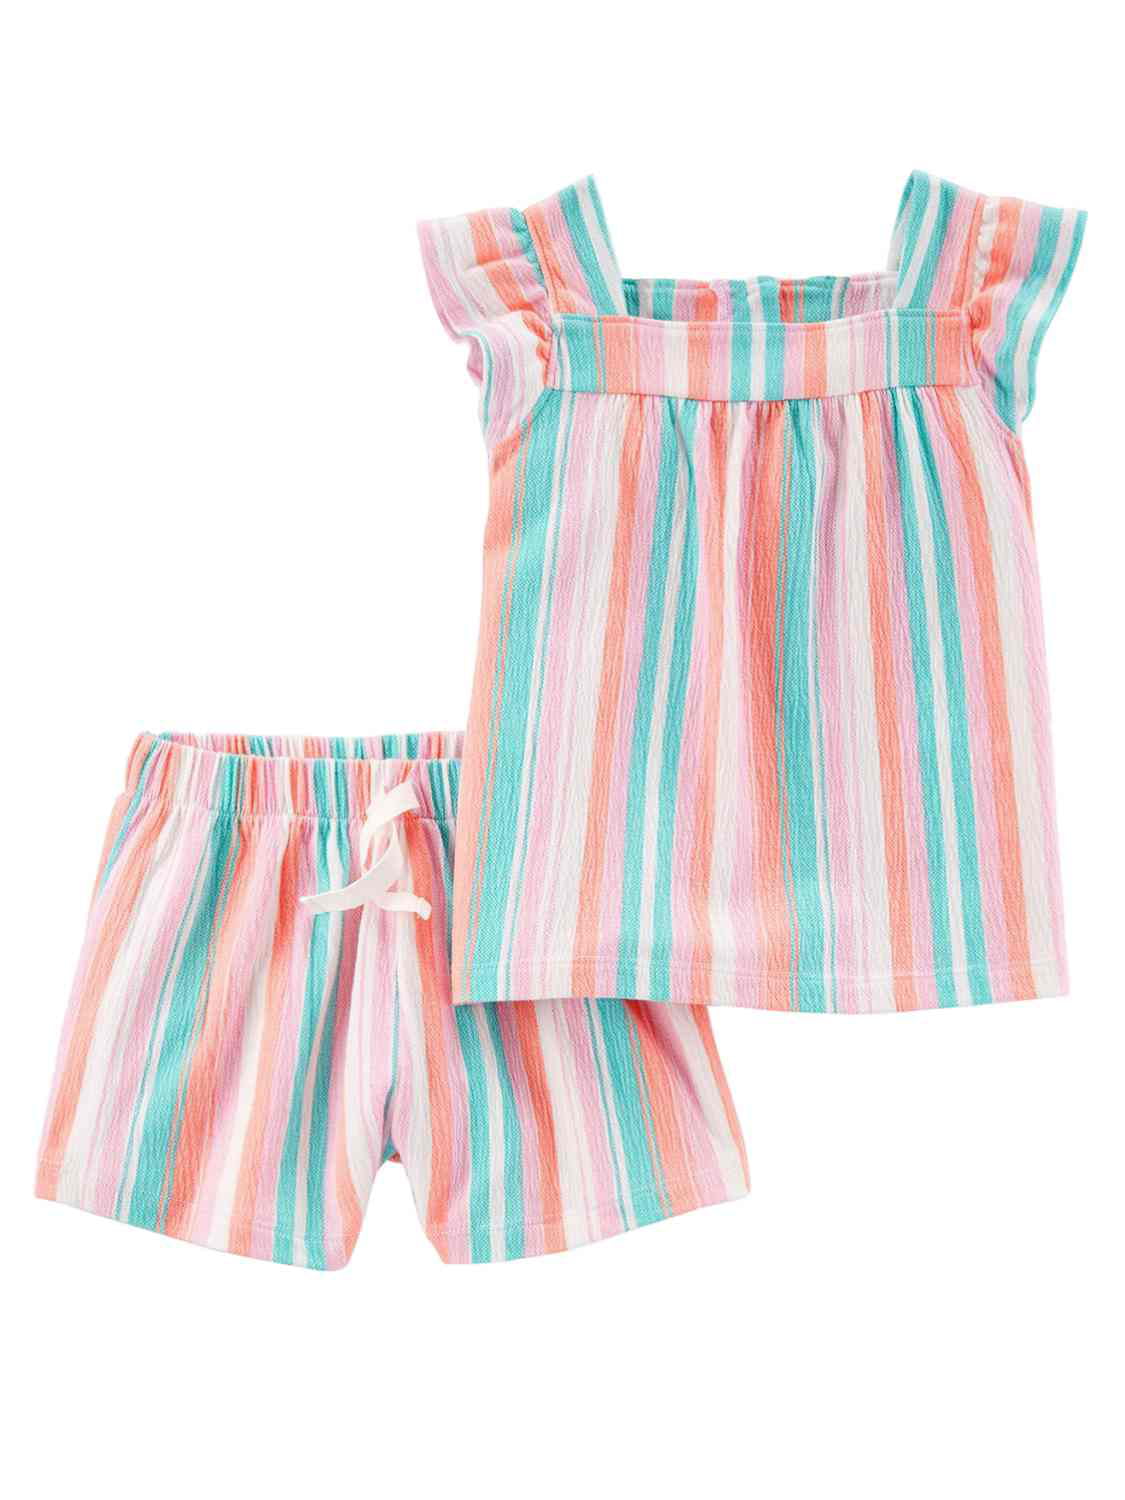 Girls Two Pce Spaghetti T Shirt Top and Shorts Set Stripped orange Age 3-6 years 